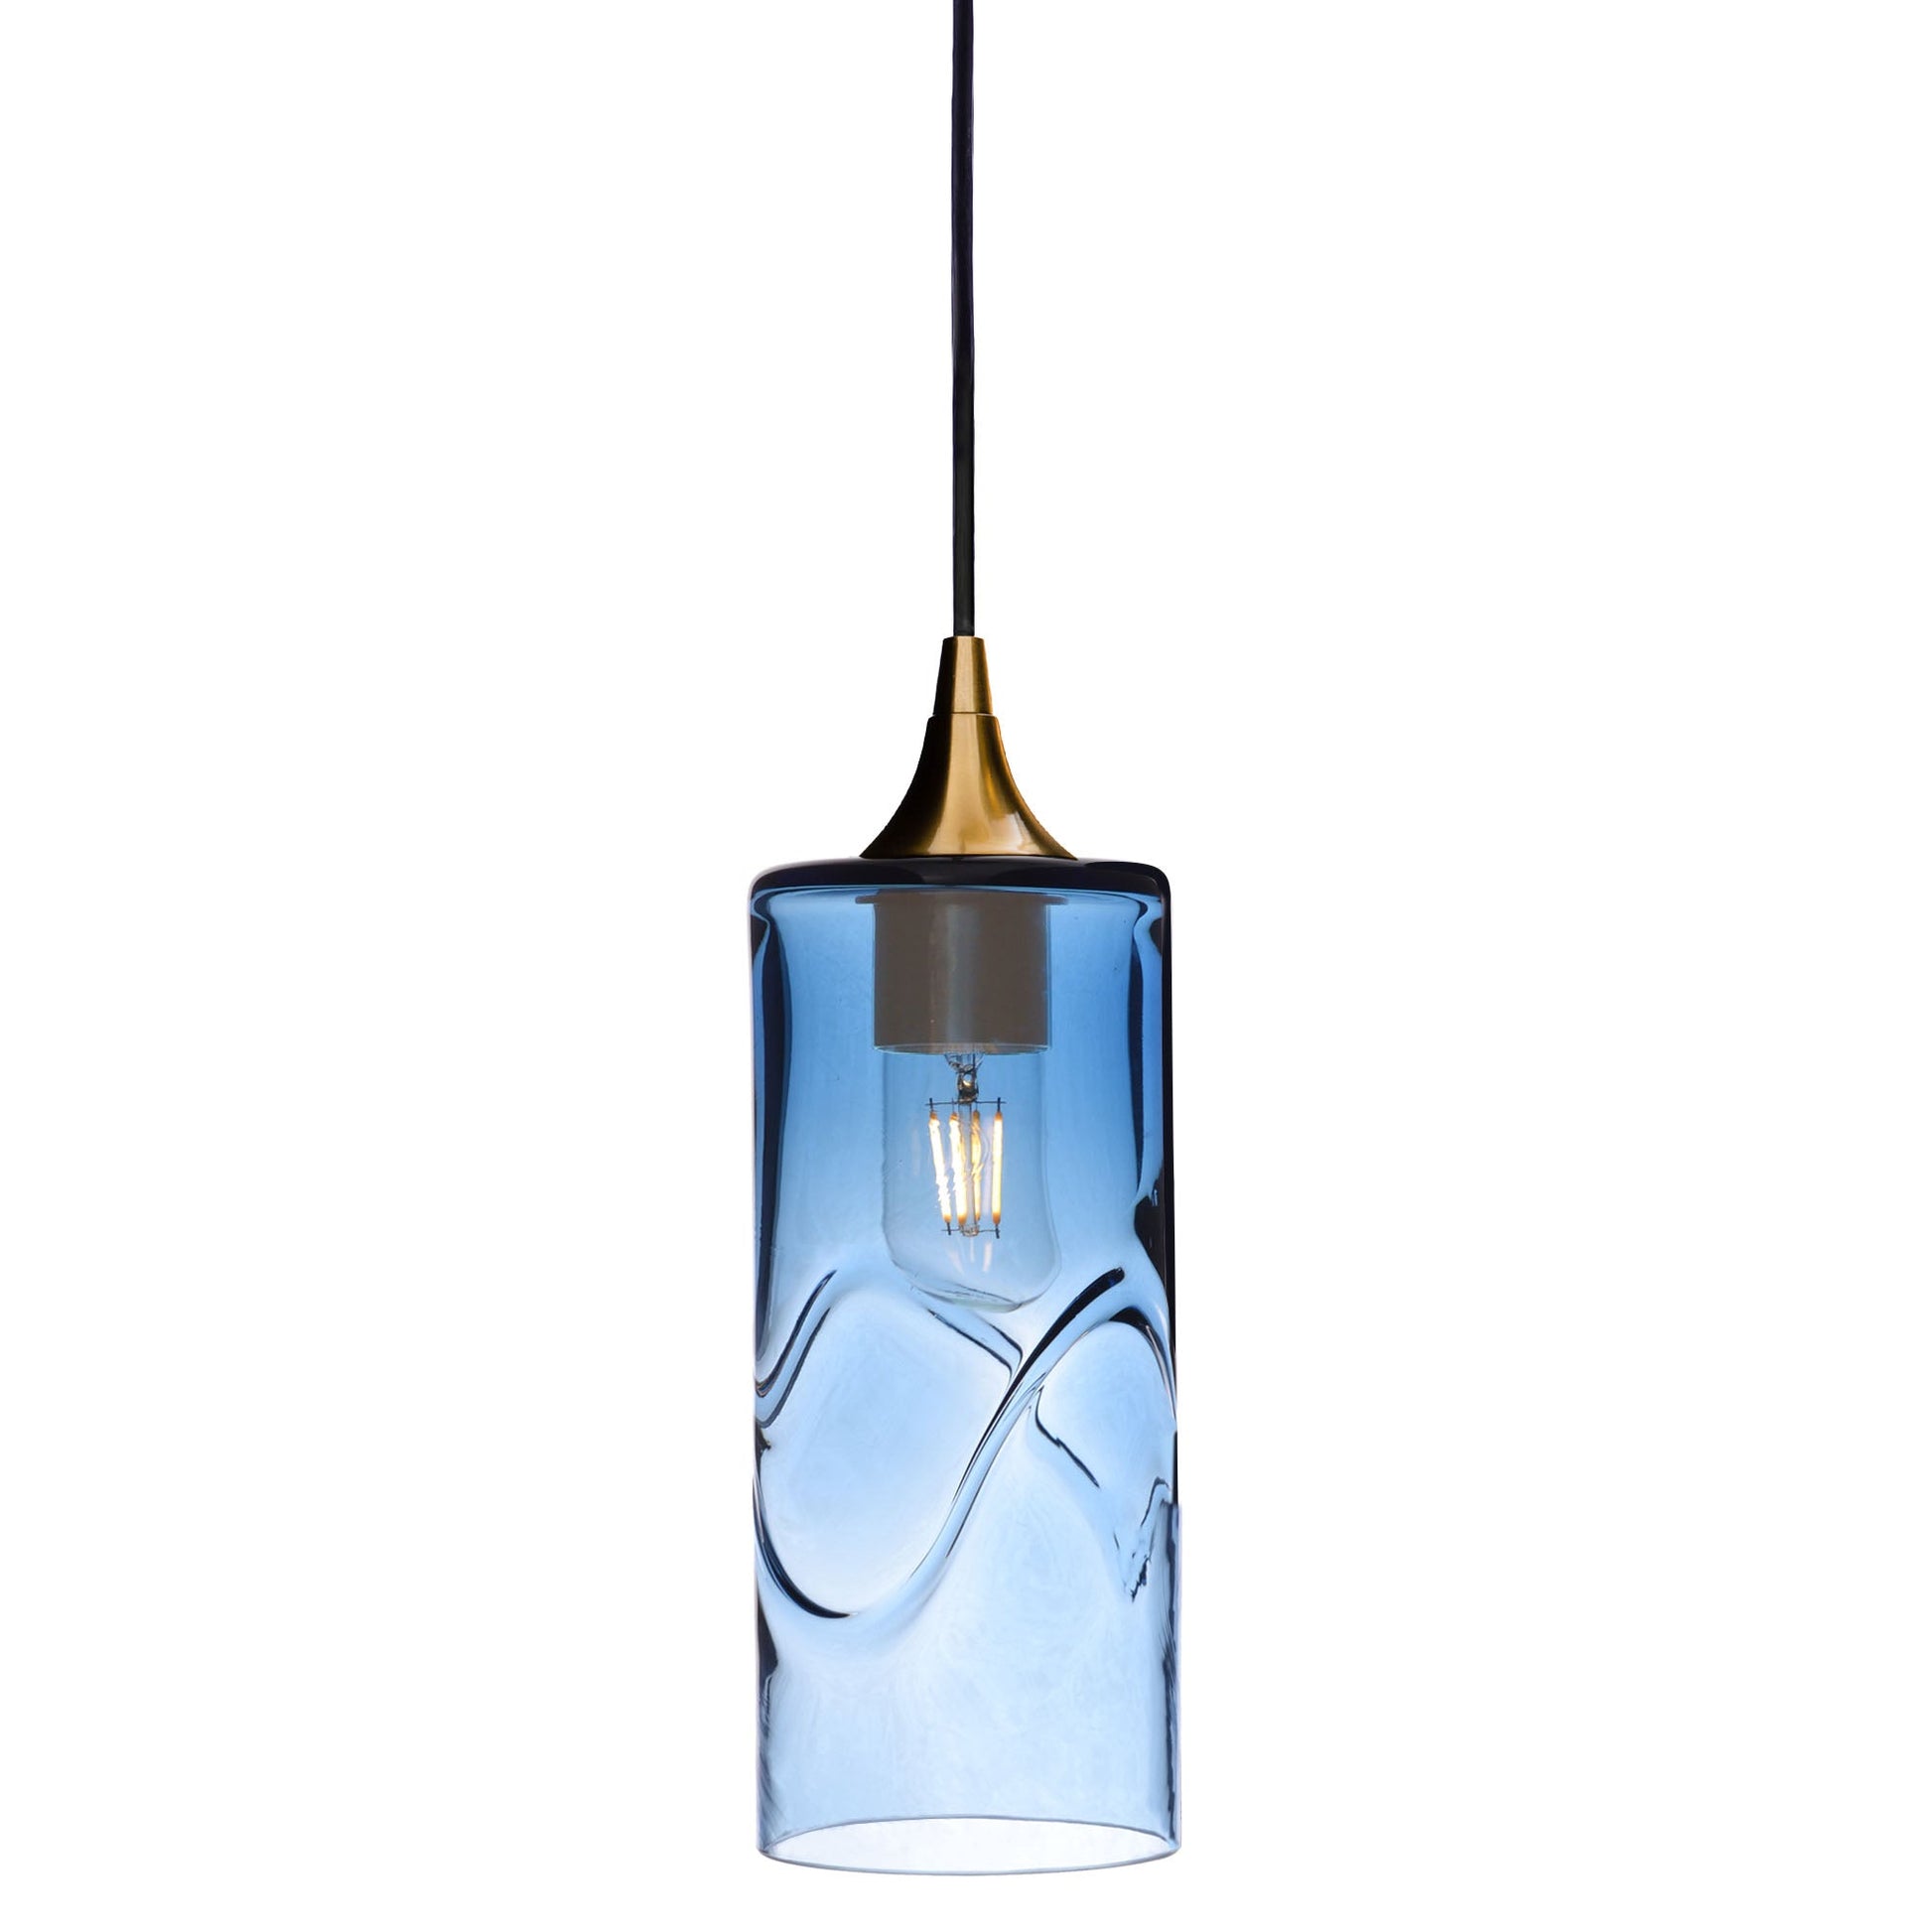 515 Swell: Single Pendant Light-Glass-Bicycle Glass Co-Steel Blue-Polished Brass-Bicycle Glass Co